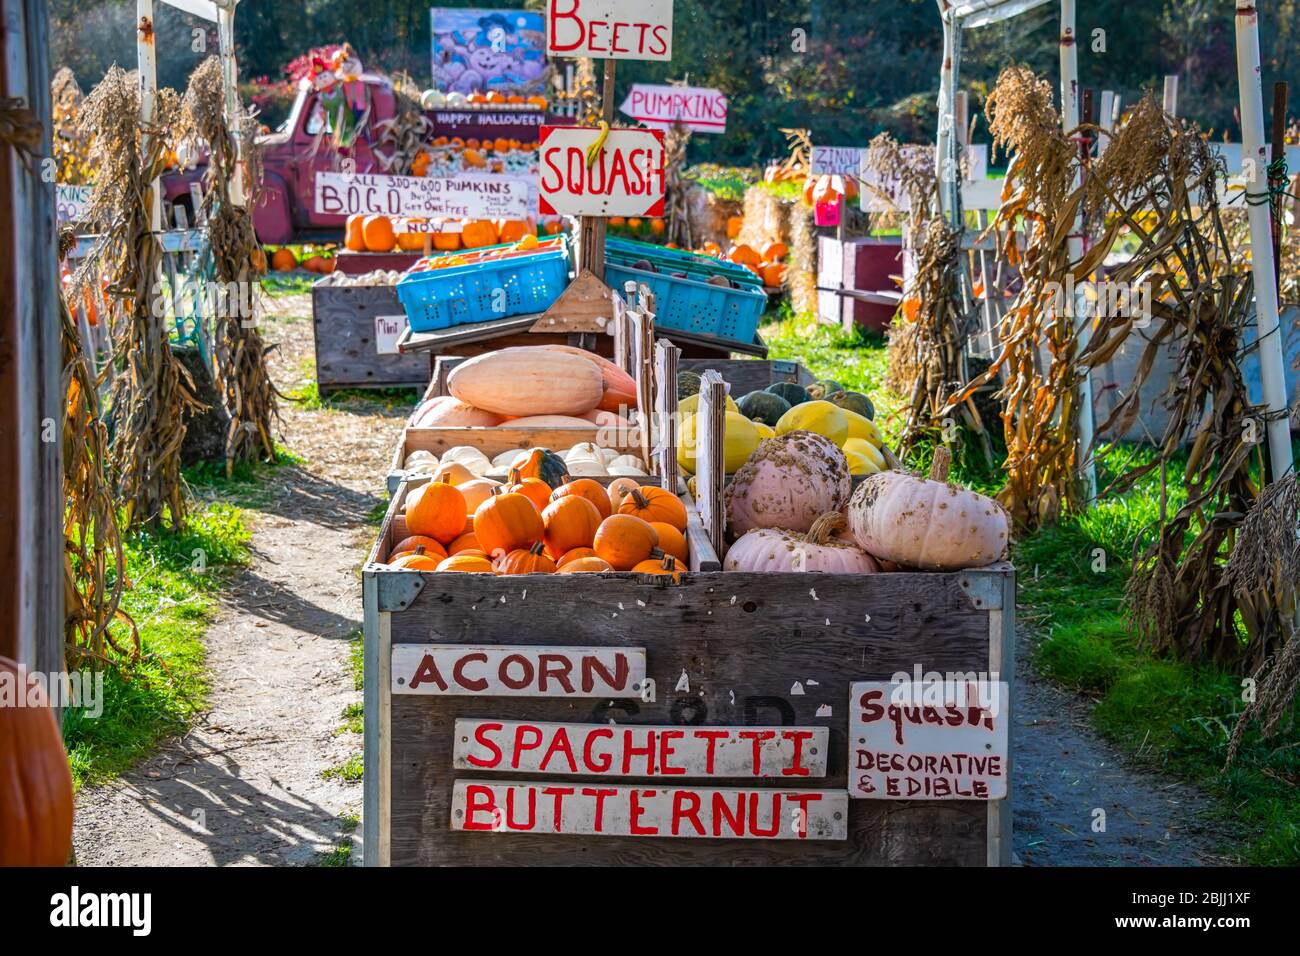 Farmer's Roadside Stand with Bins of Squash & Pumpkins,Labeled Stock Photo